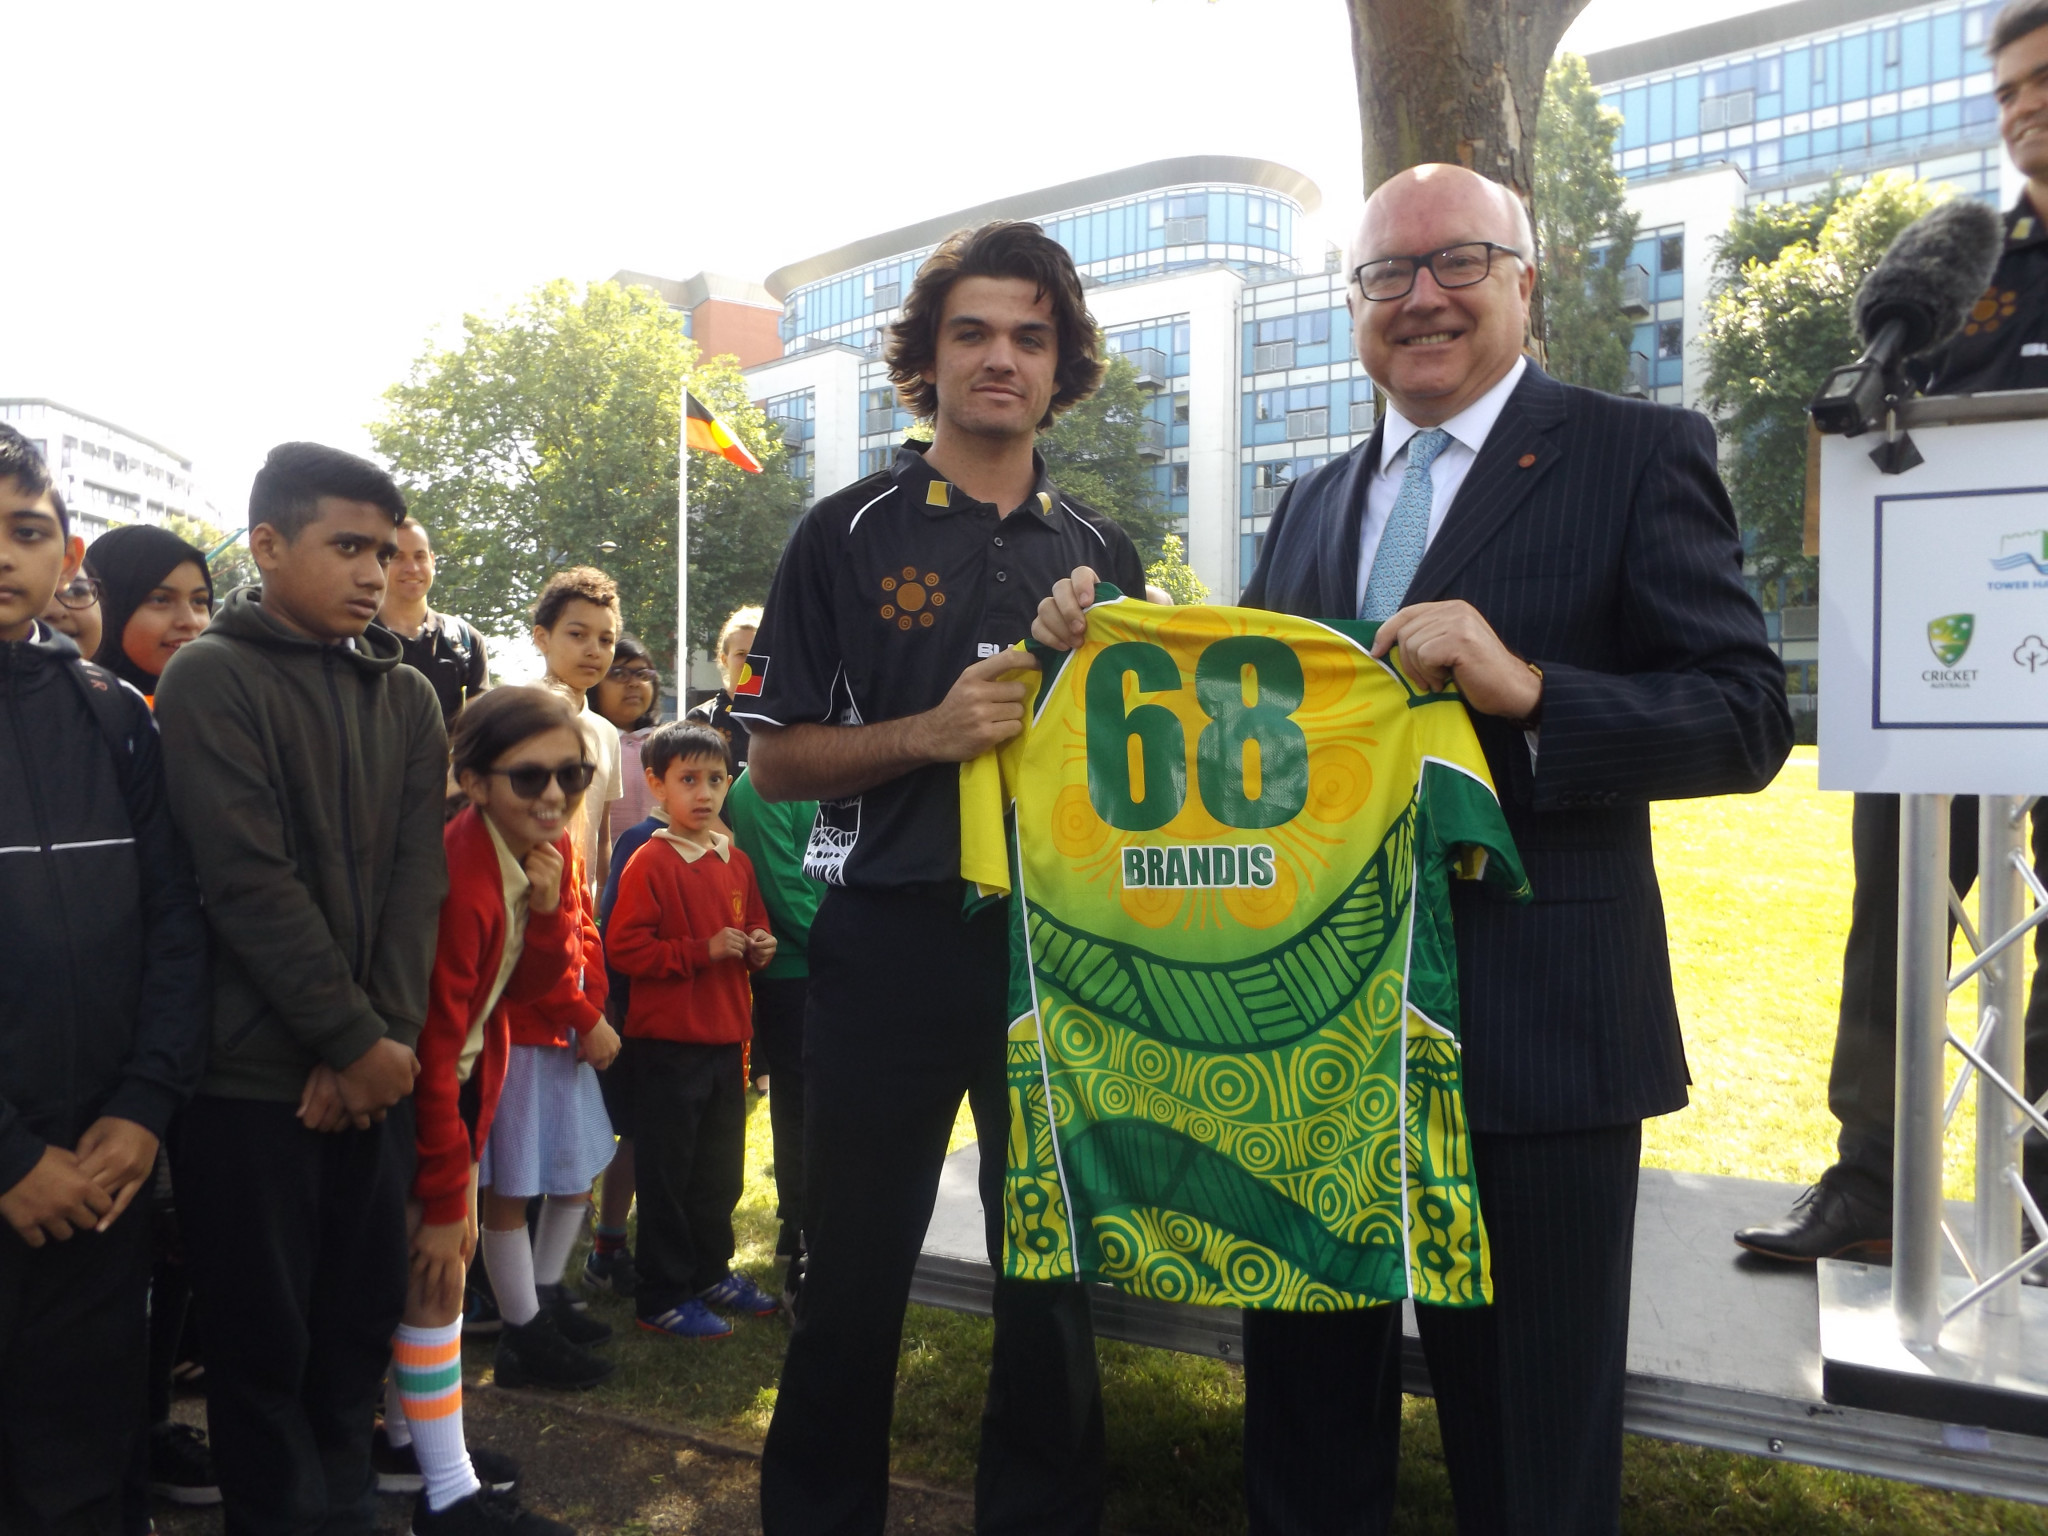 Australia's High Commissioner George Brandis was presented with a team shirt bearing his name ©Phil Barker